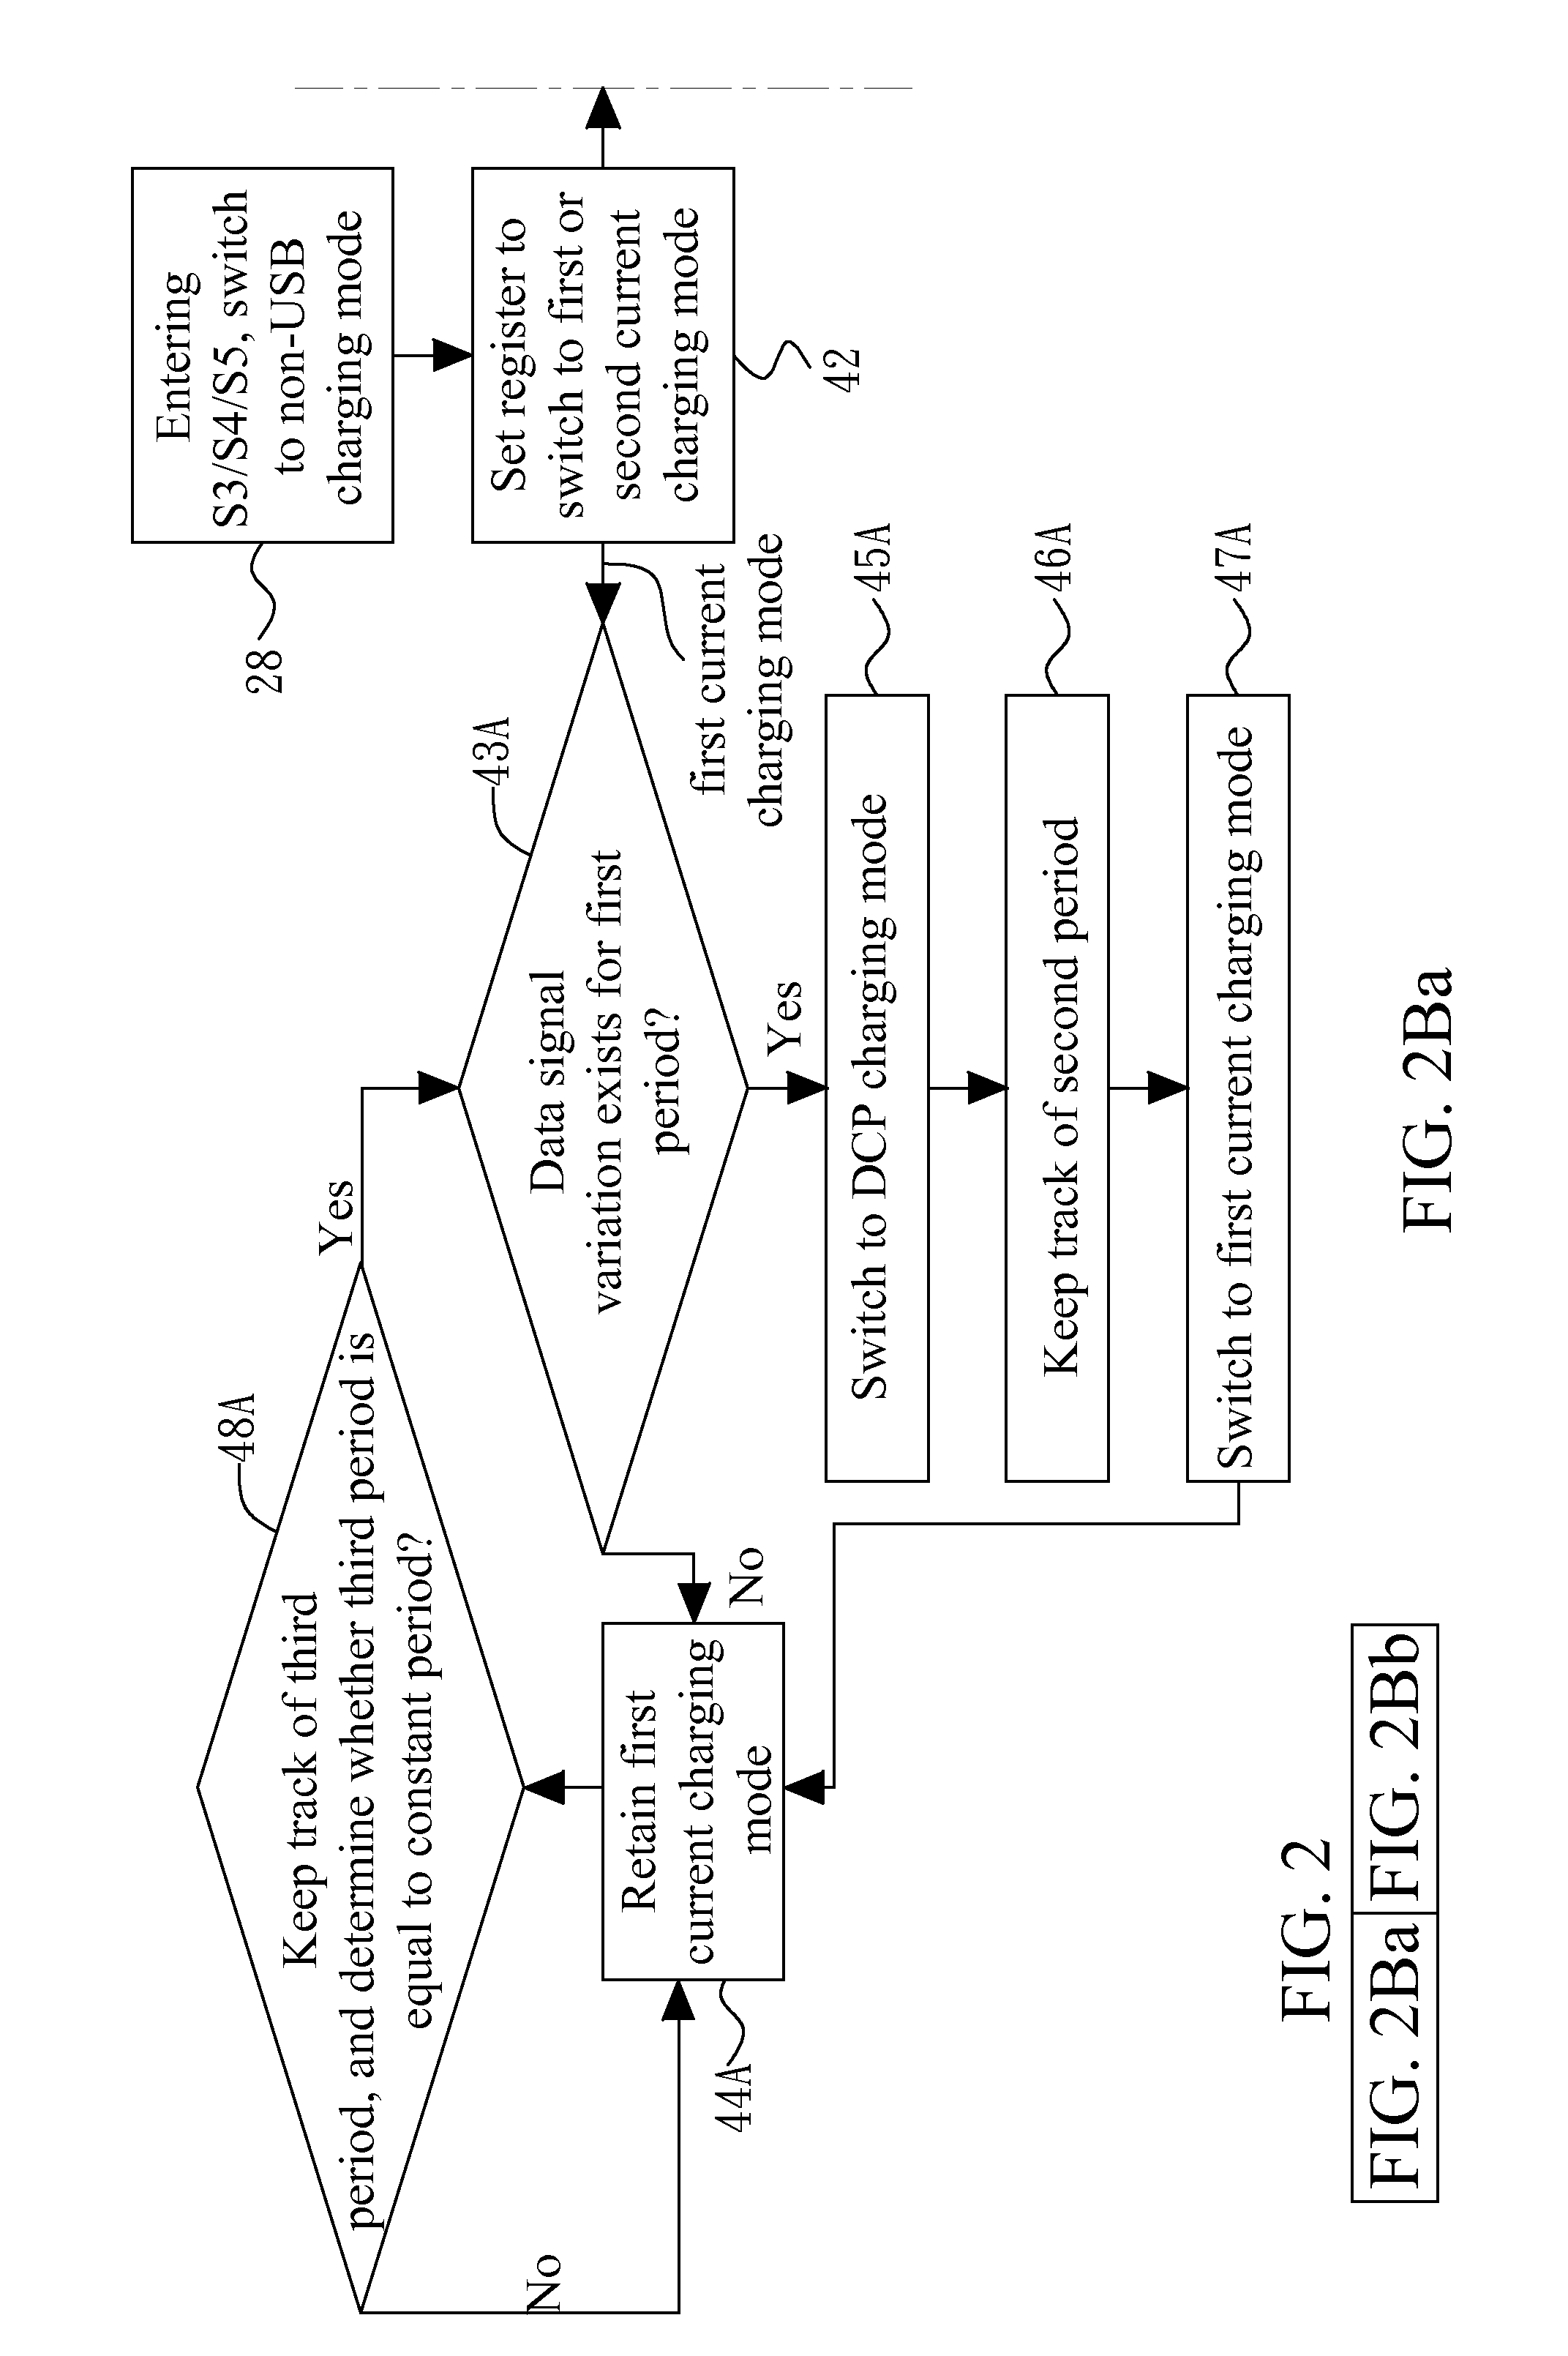 Adaptive USB charging method and system